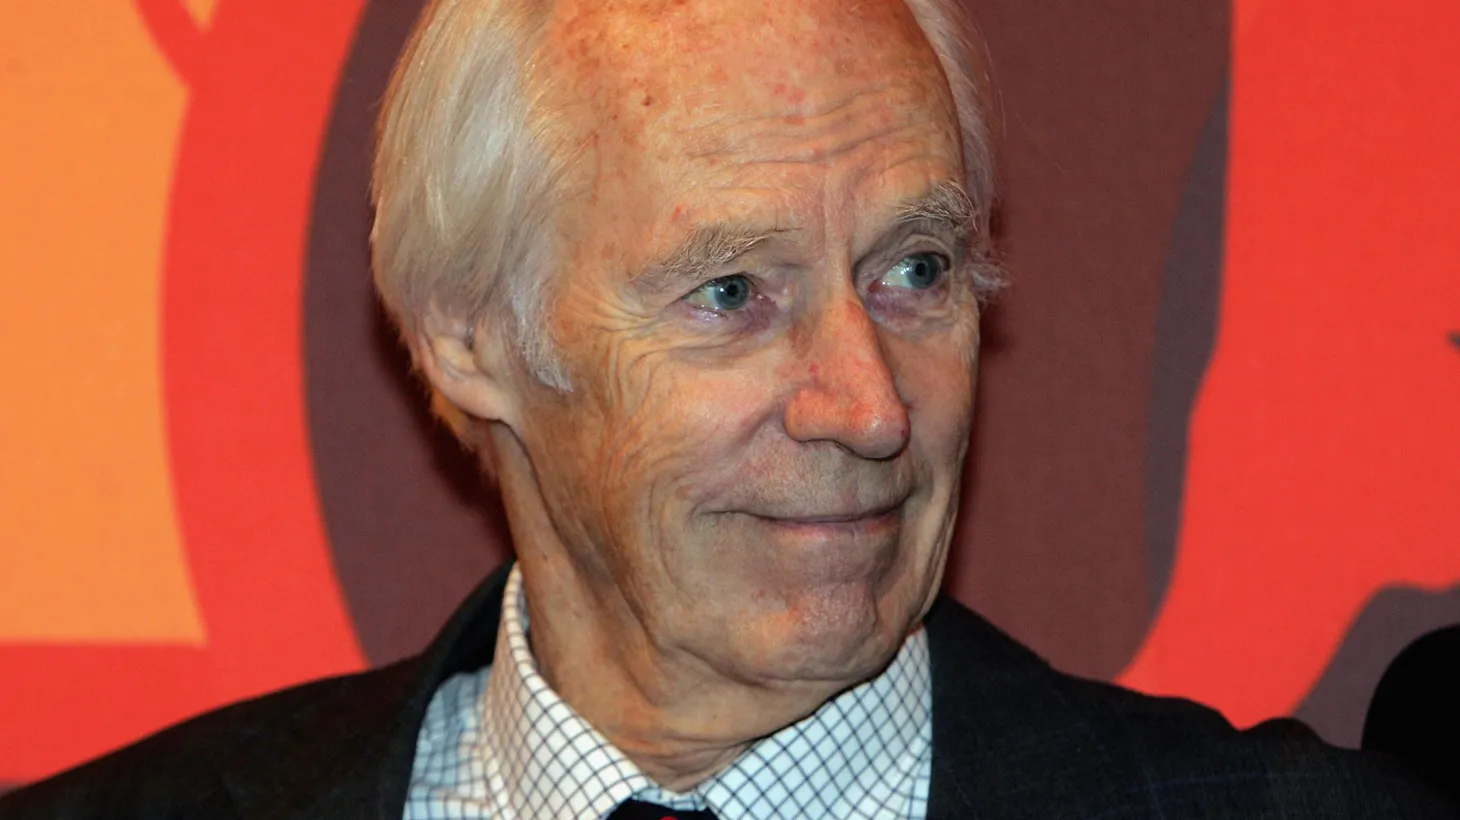 Chris Douridas excerpts an interview with legendary producer George Martin, enabling listeners to be led through The Beatles' second anthology by the man often called "the fifth Beatle."